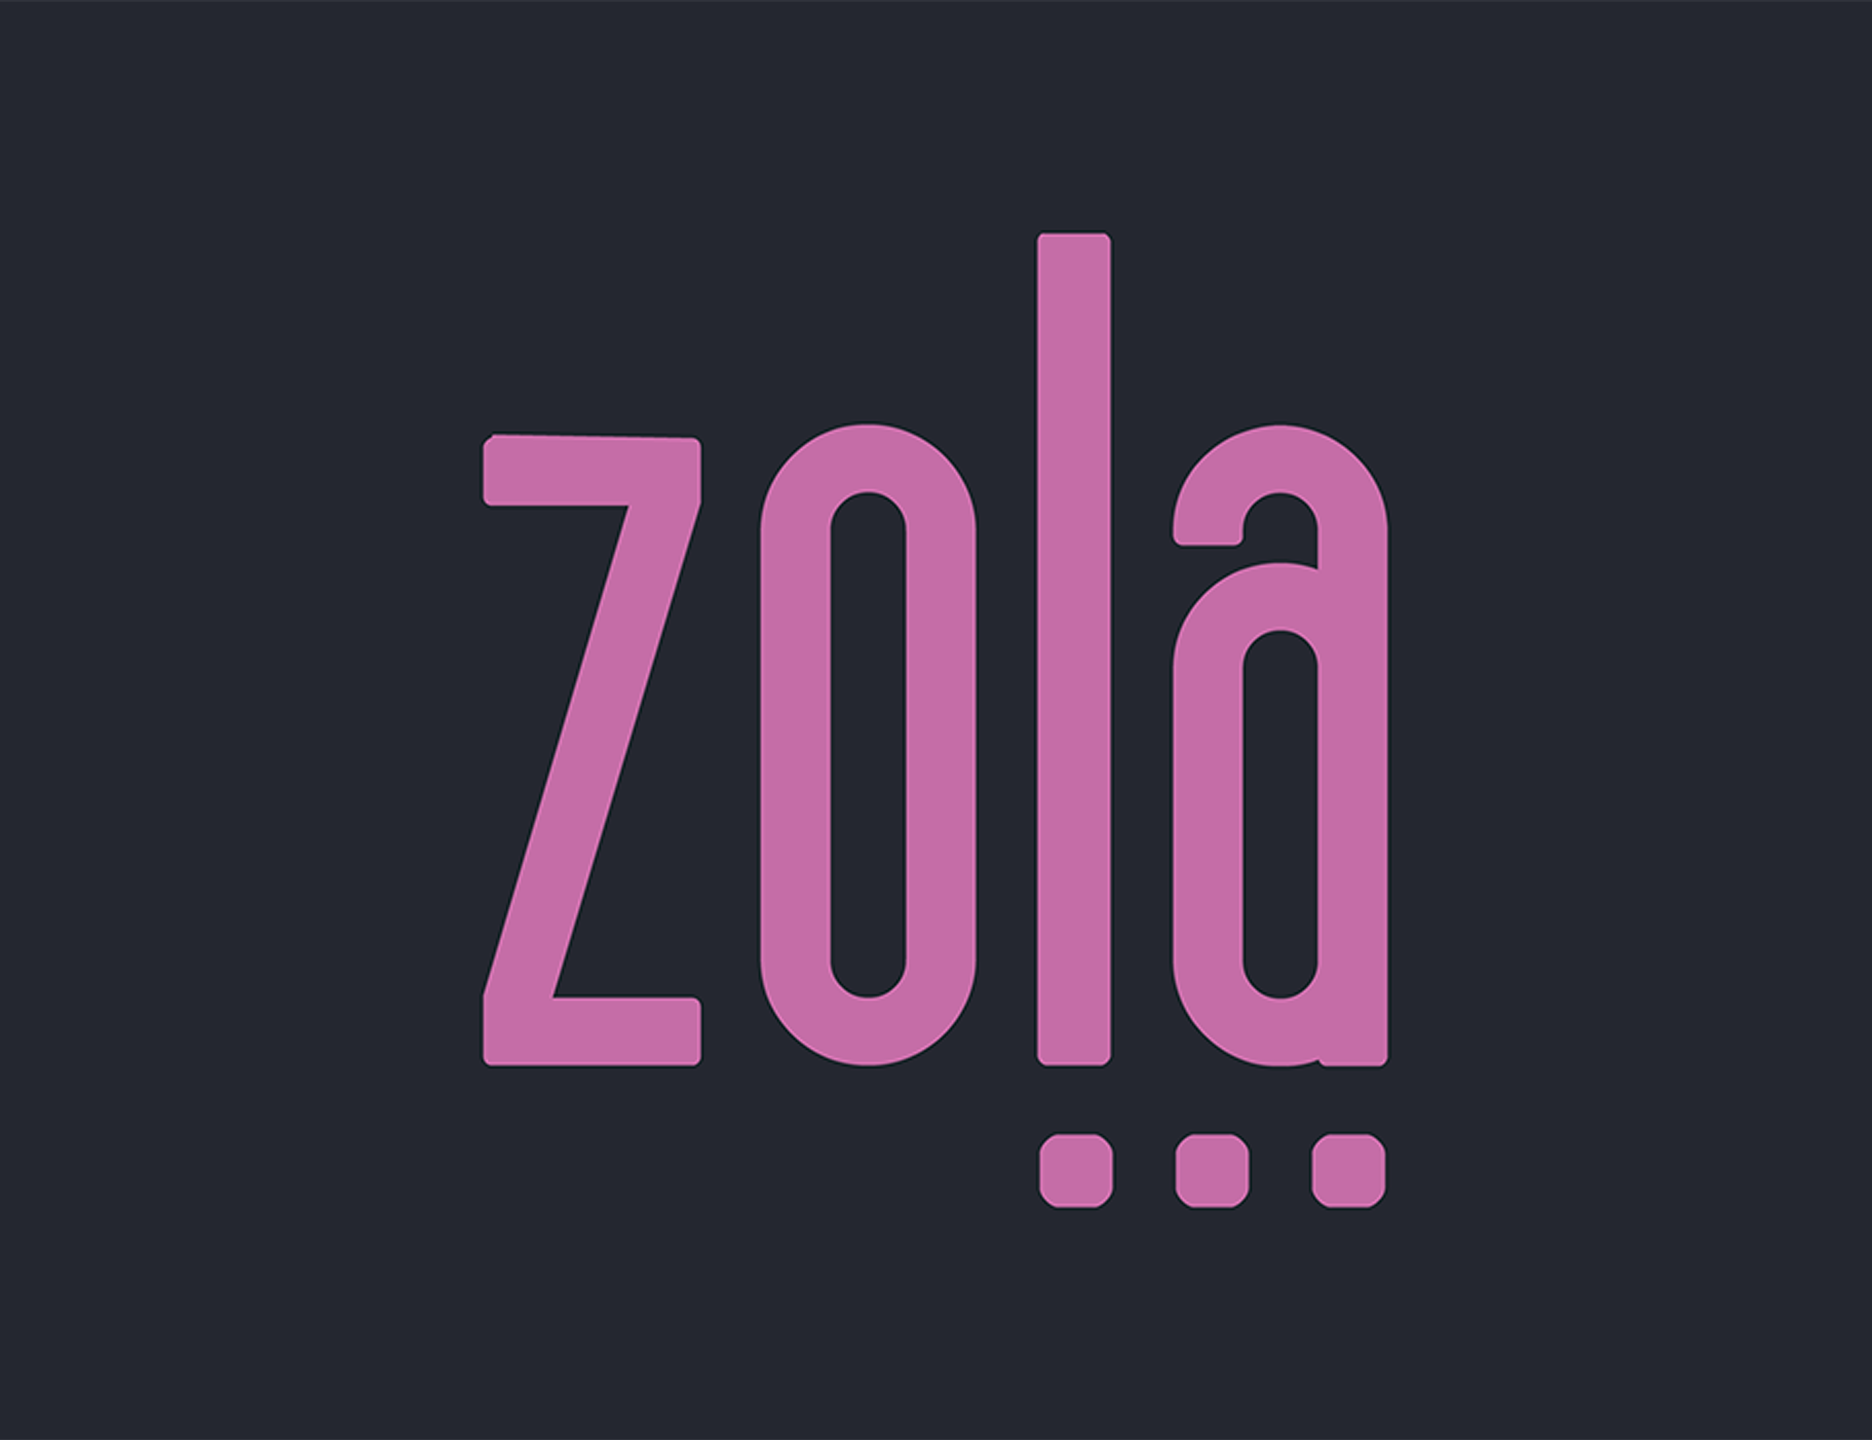 Logo for Zola (word art, purple text on black background, with 3 dots under "l" and "a")